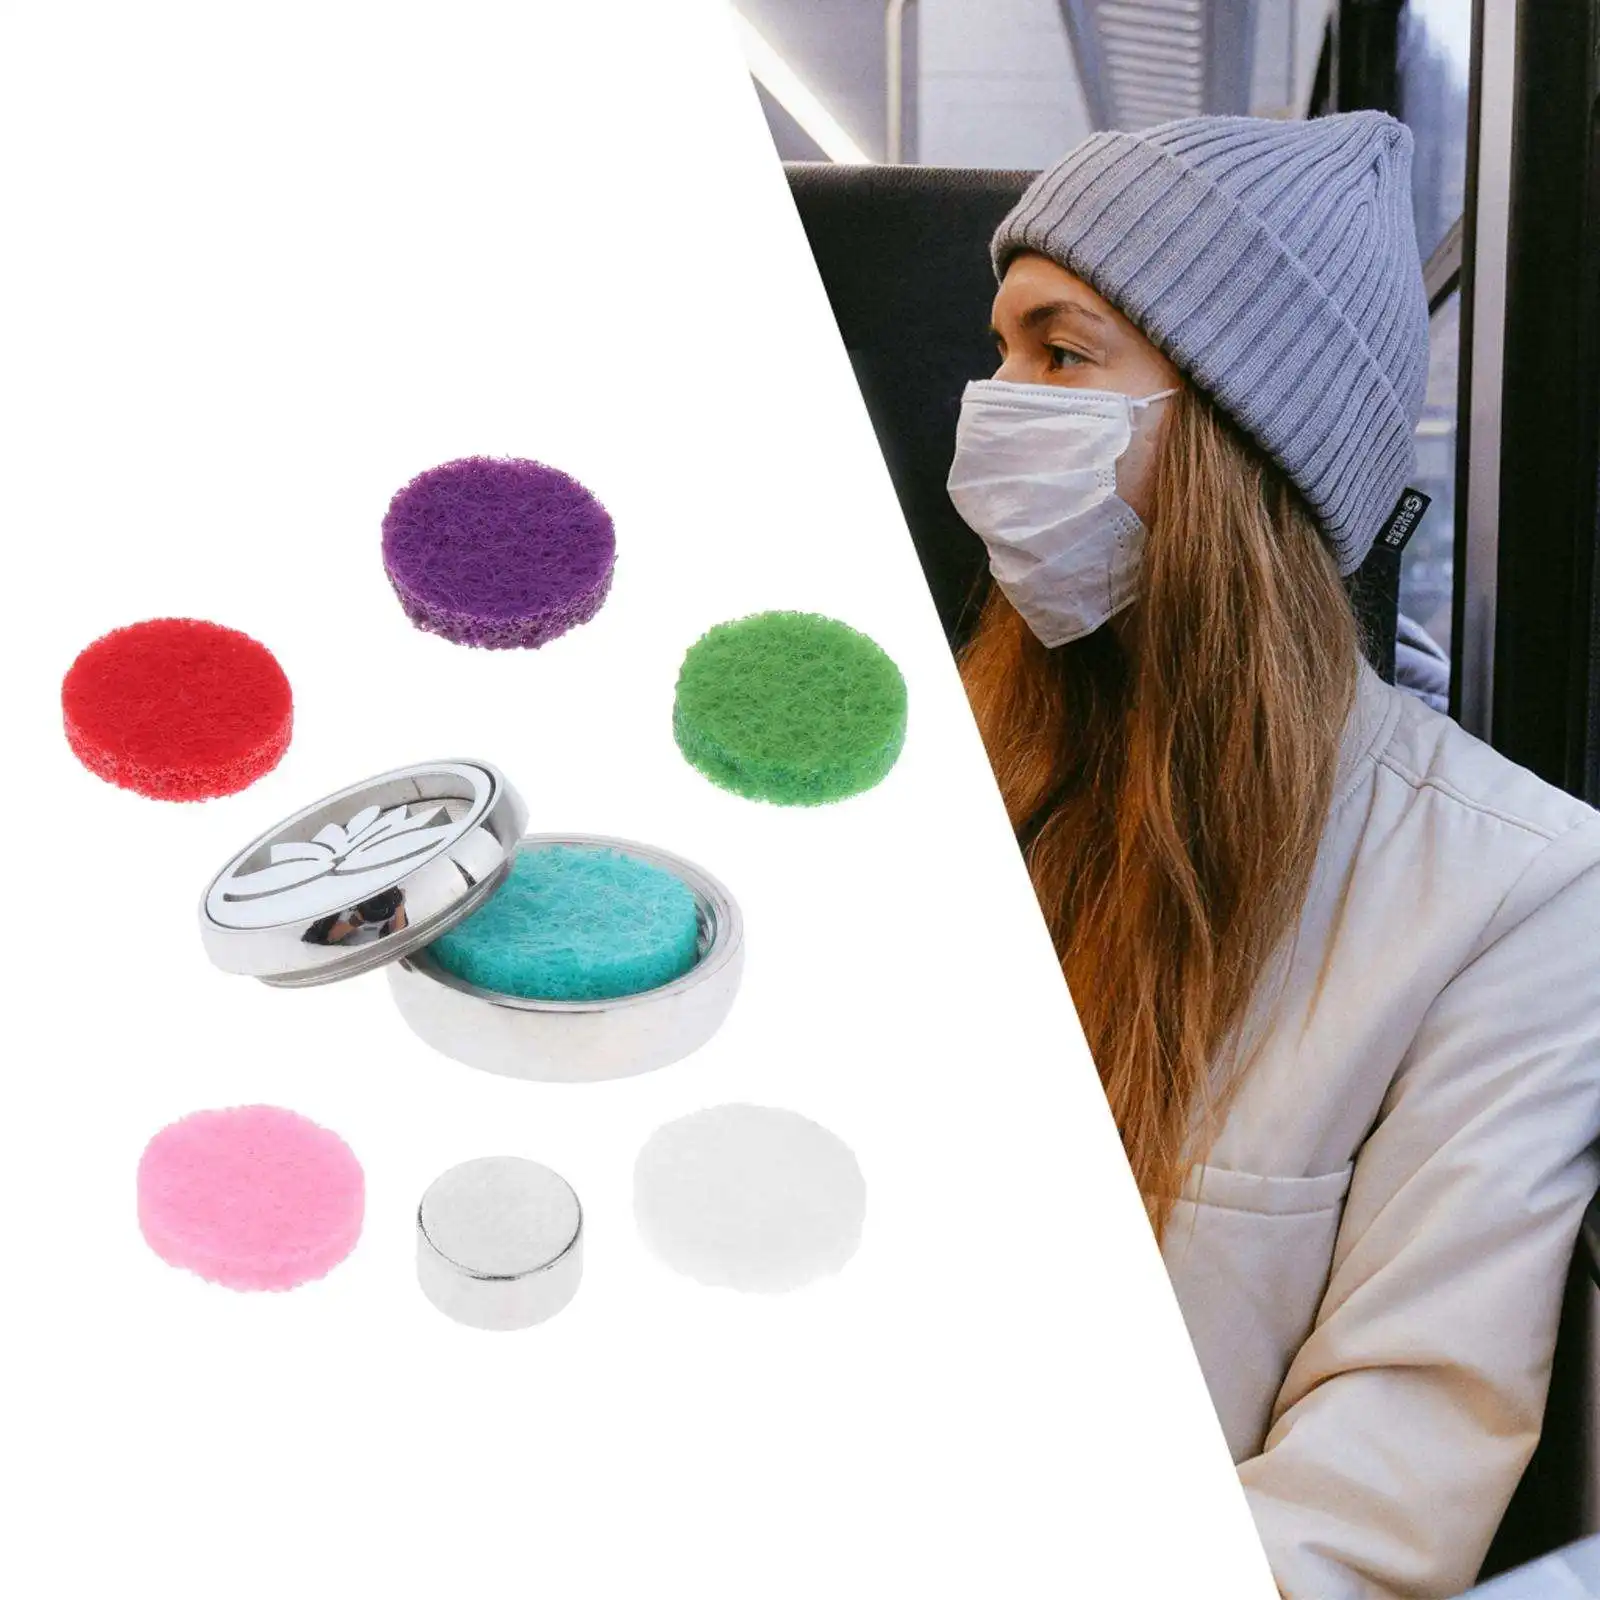 10mm Essential Oil Diffuser Clip Mini Magnetic Locket Aromatherapy Face Masks Air Freshener with Felt Pads Health Protection